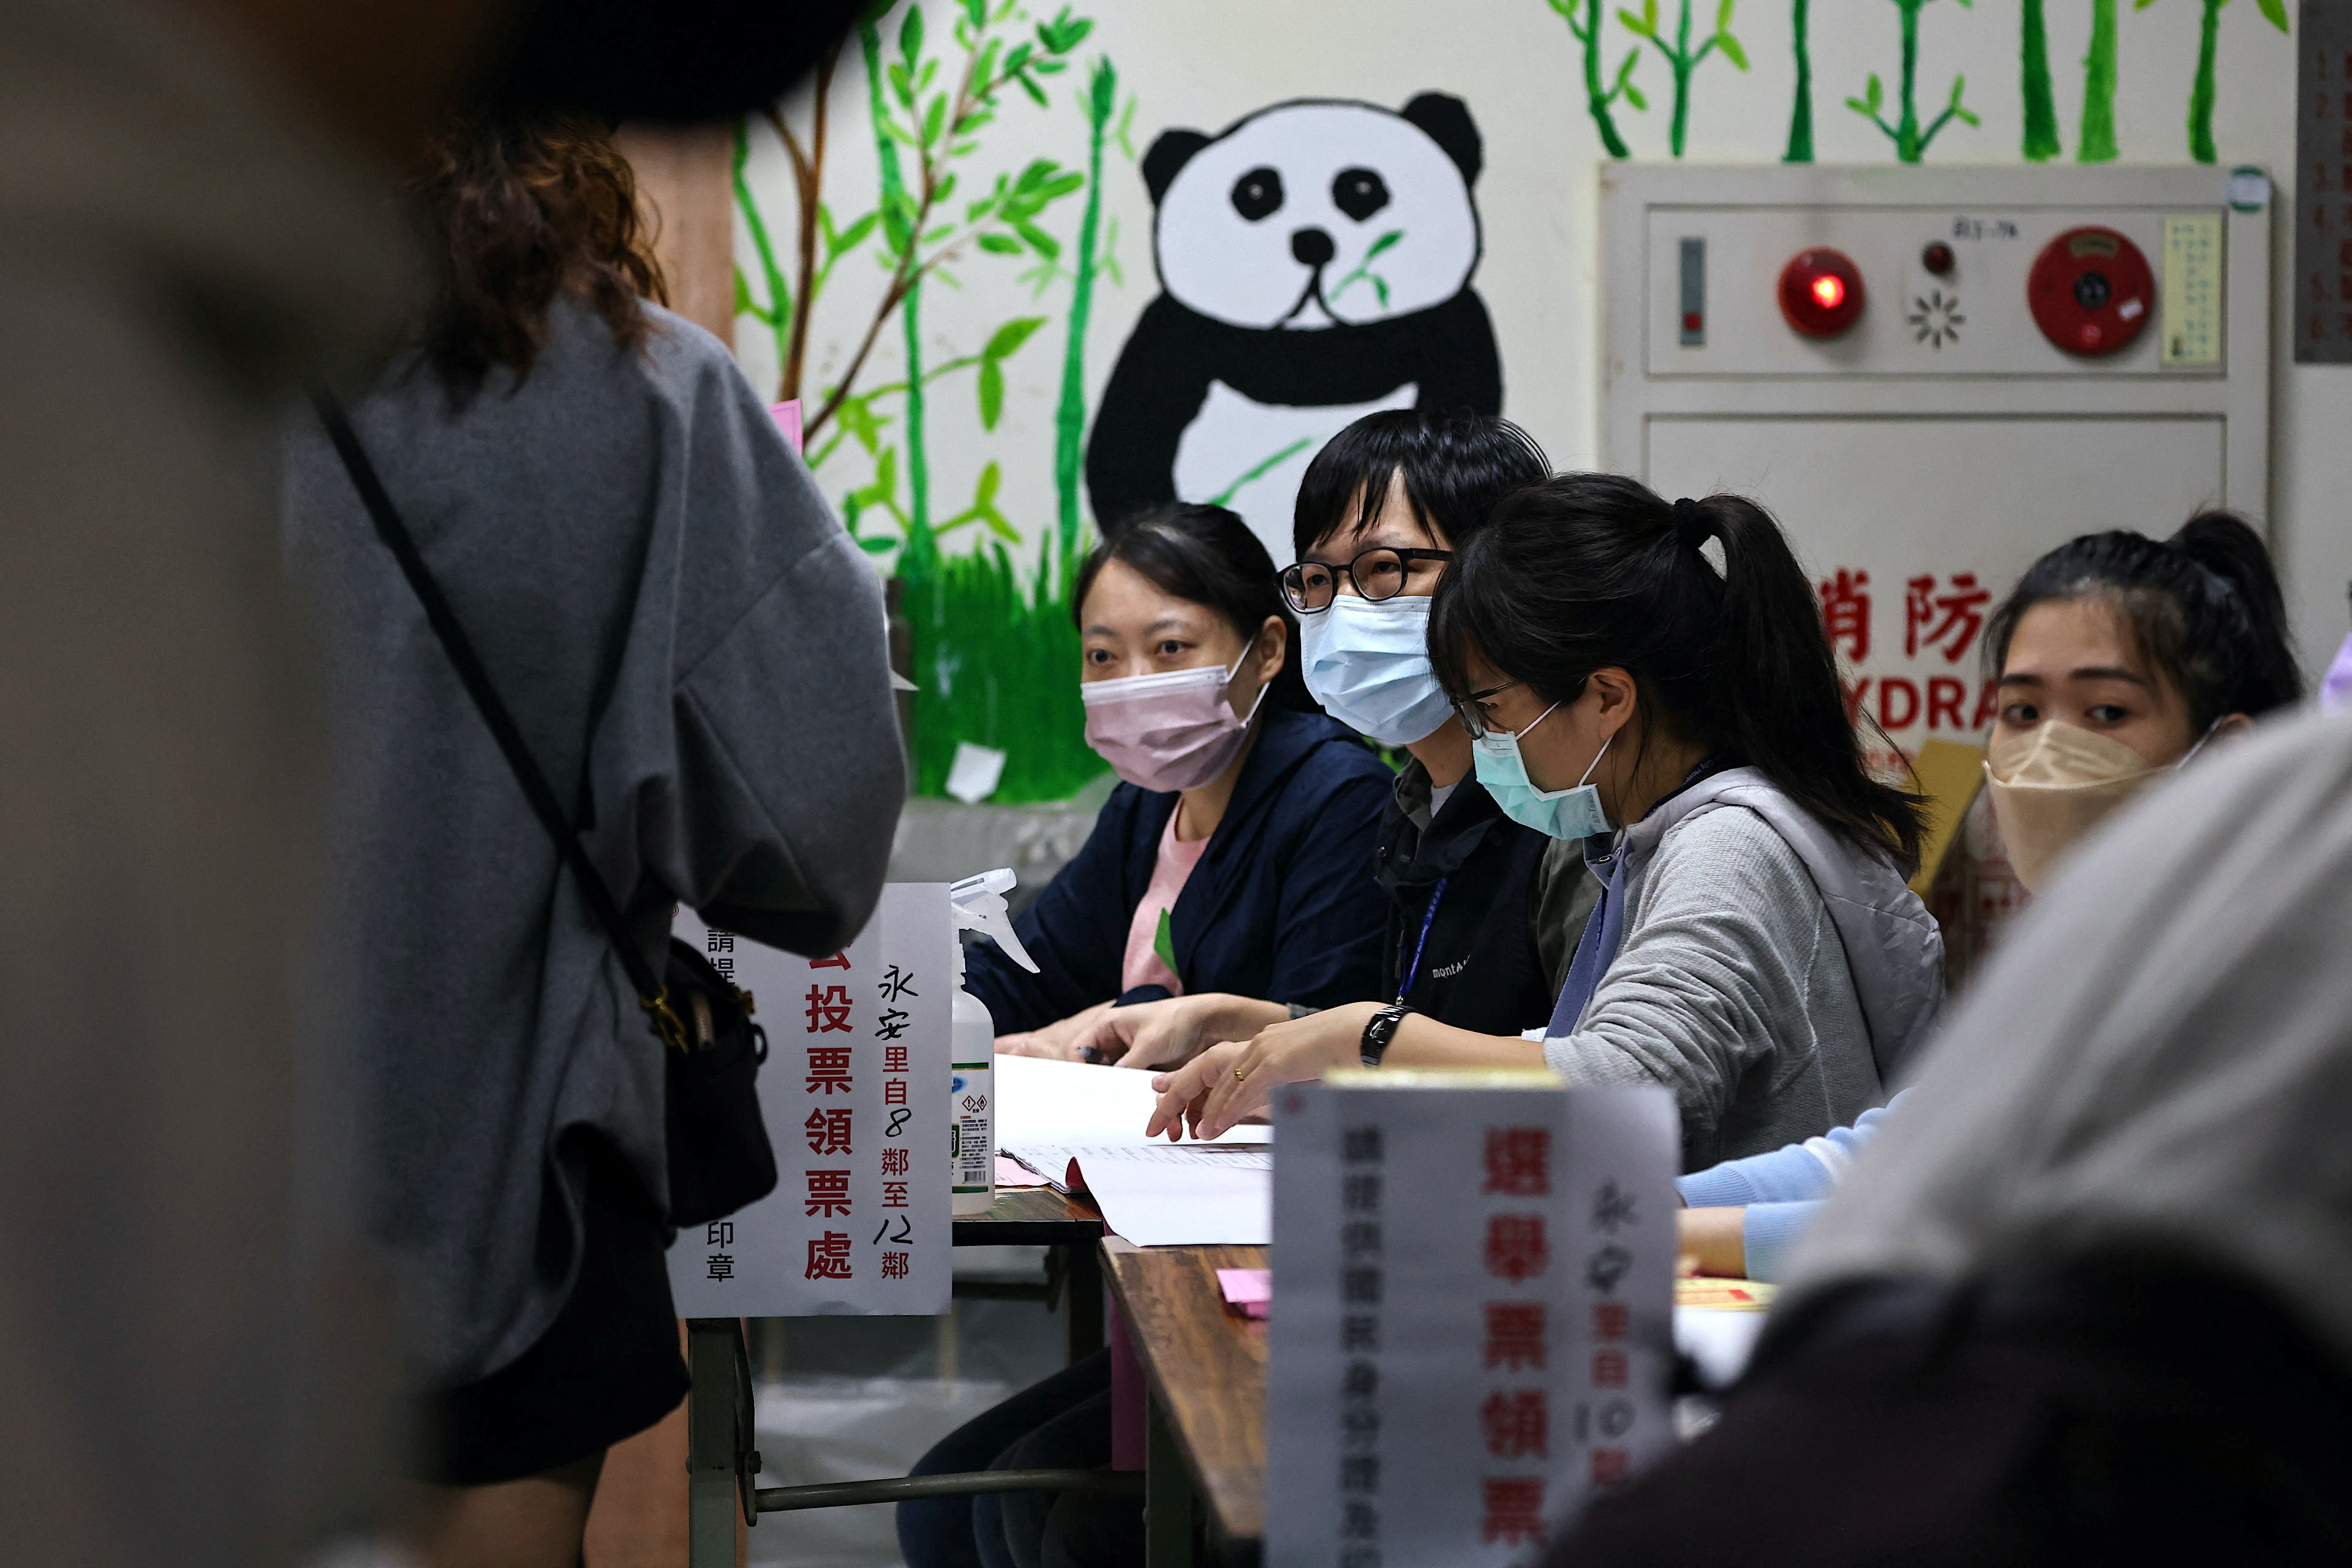 People line up to cast their votes on election day in Taipei